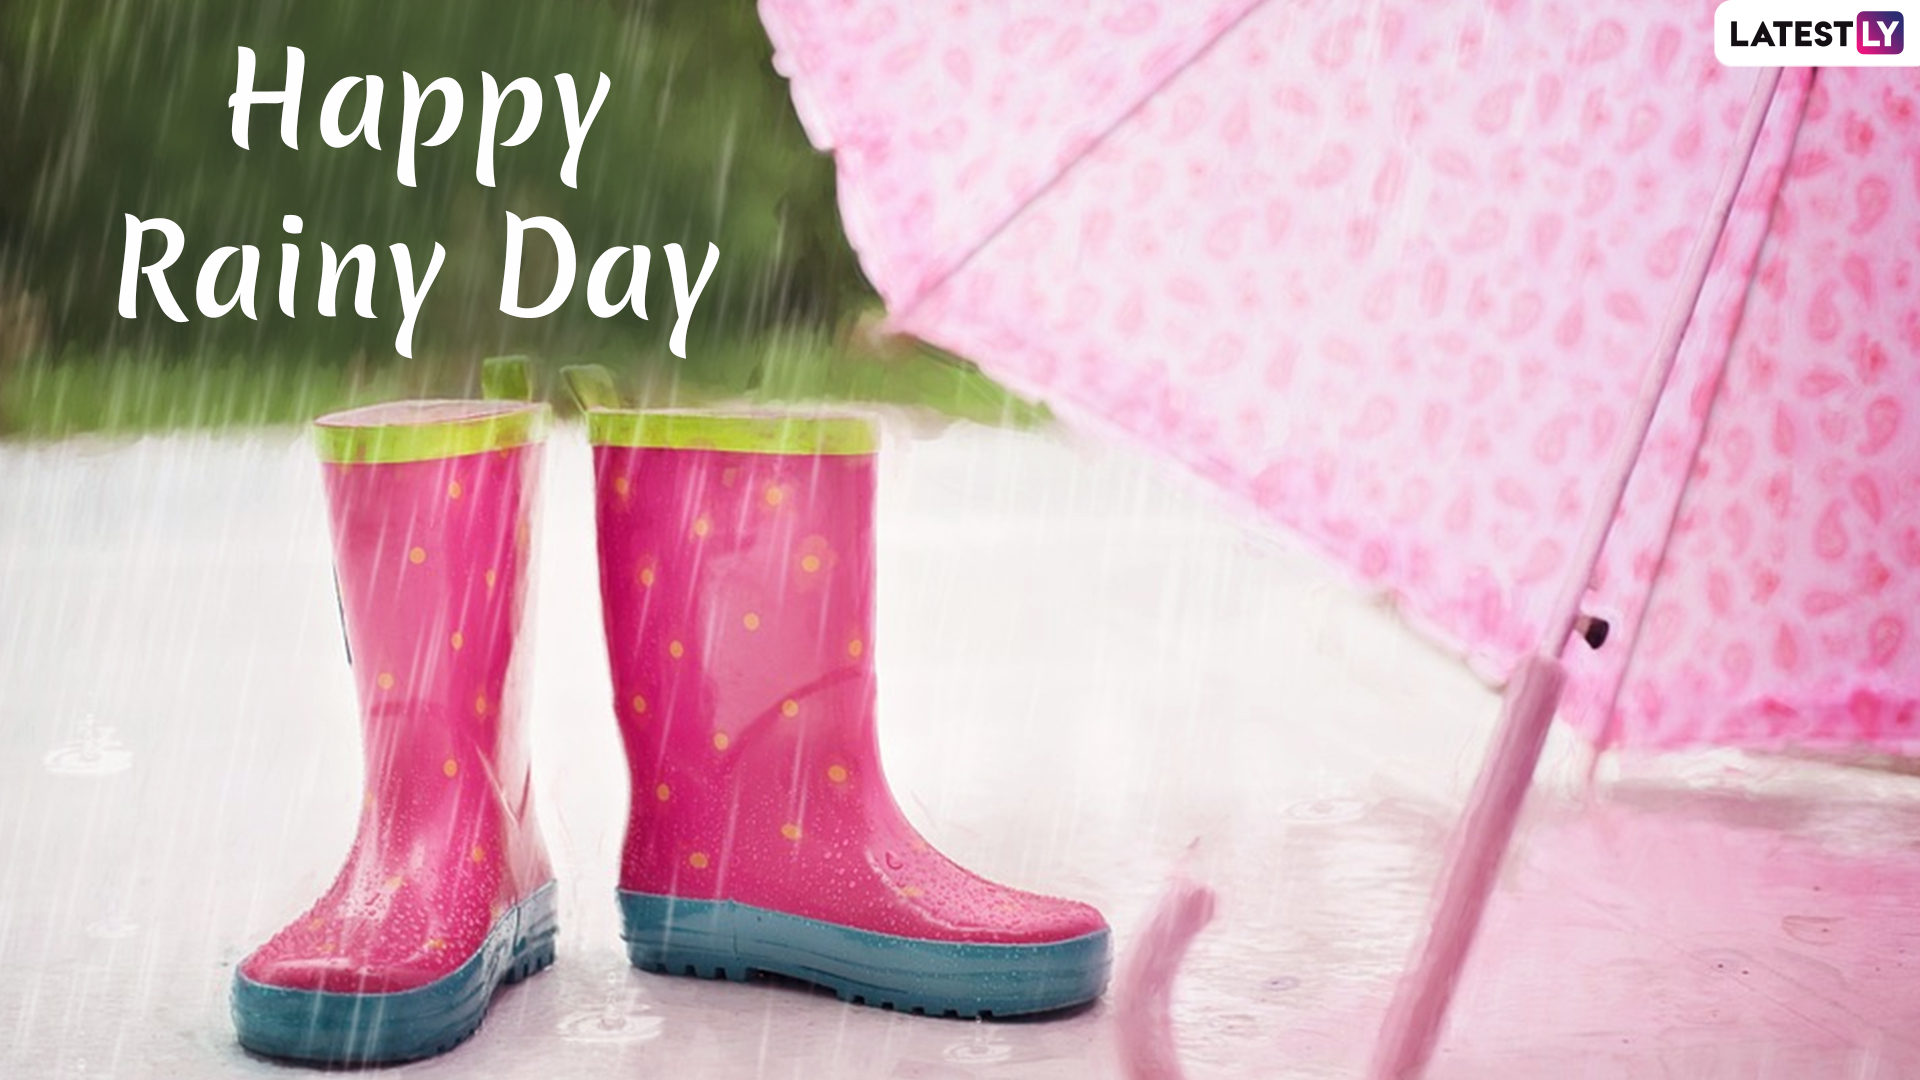 Happy Rainy Day 2019 Images Wishes and Status Monsoon 